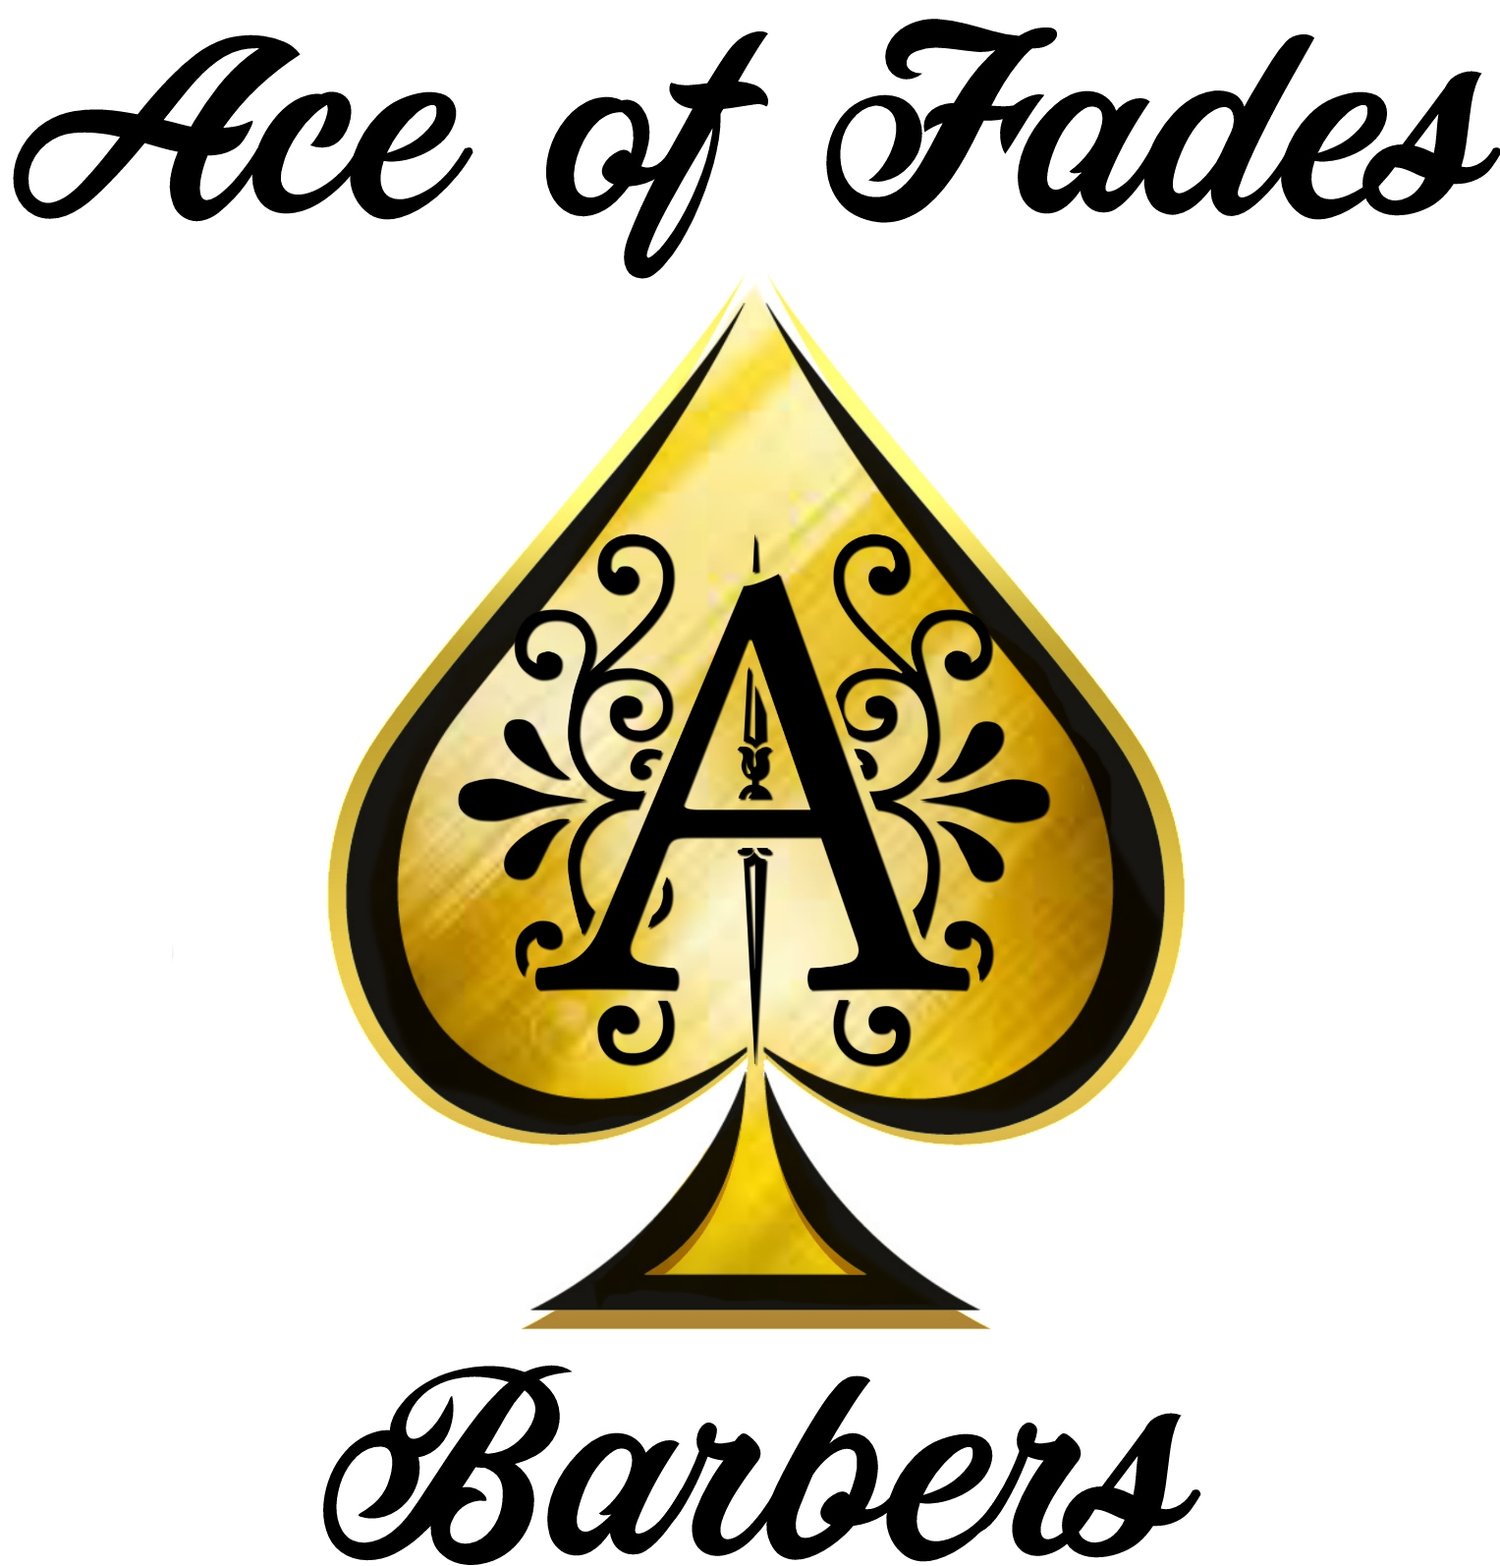 Ace of Fades Barbers